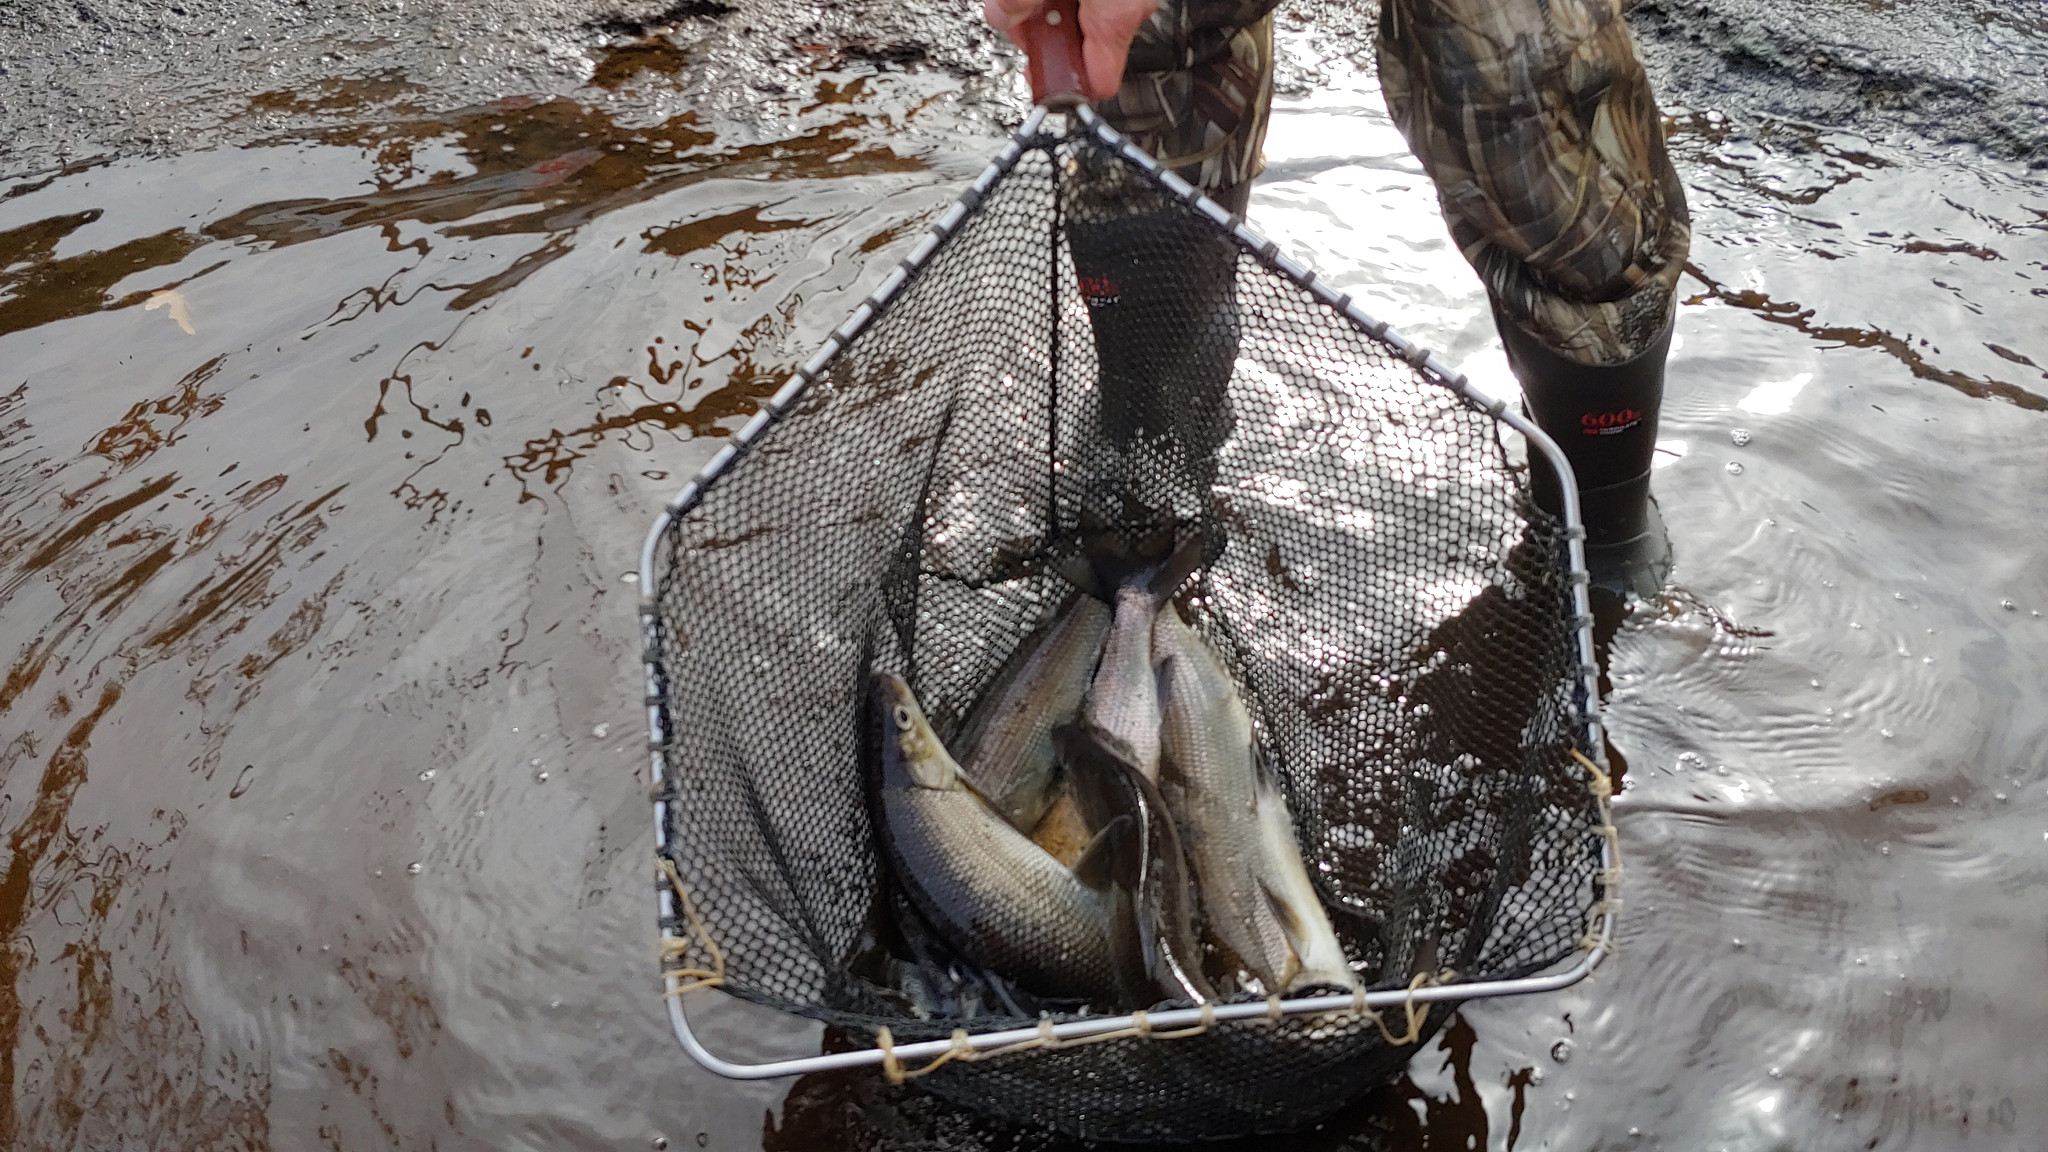 The legs of a person wearing camo and rubber wading boots in shallow water are visible as the person holds up a net containing four or five whitefish. 